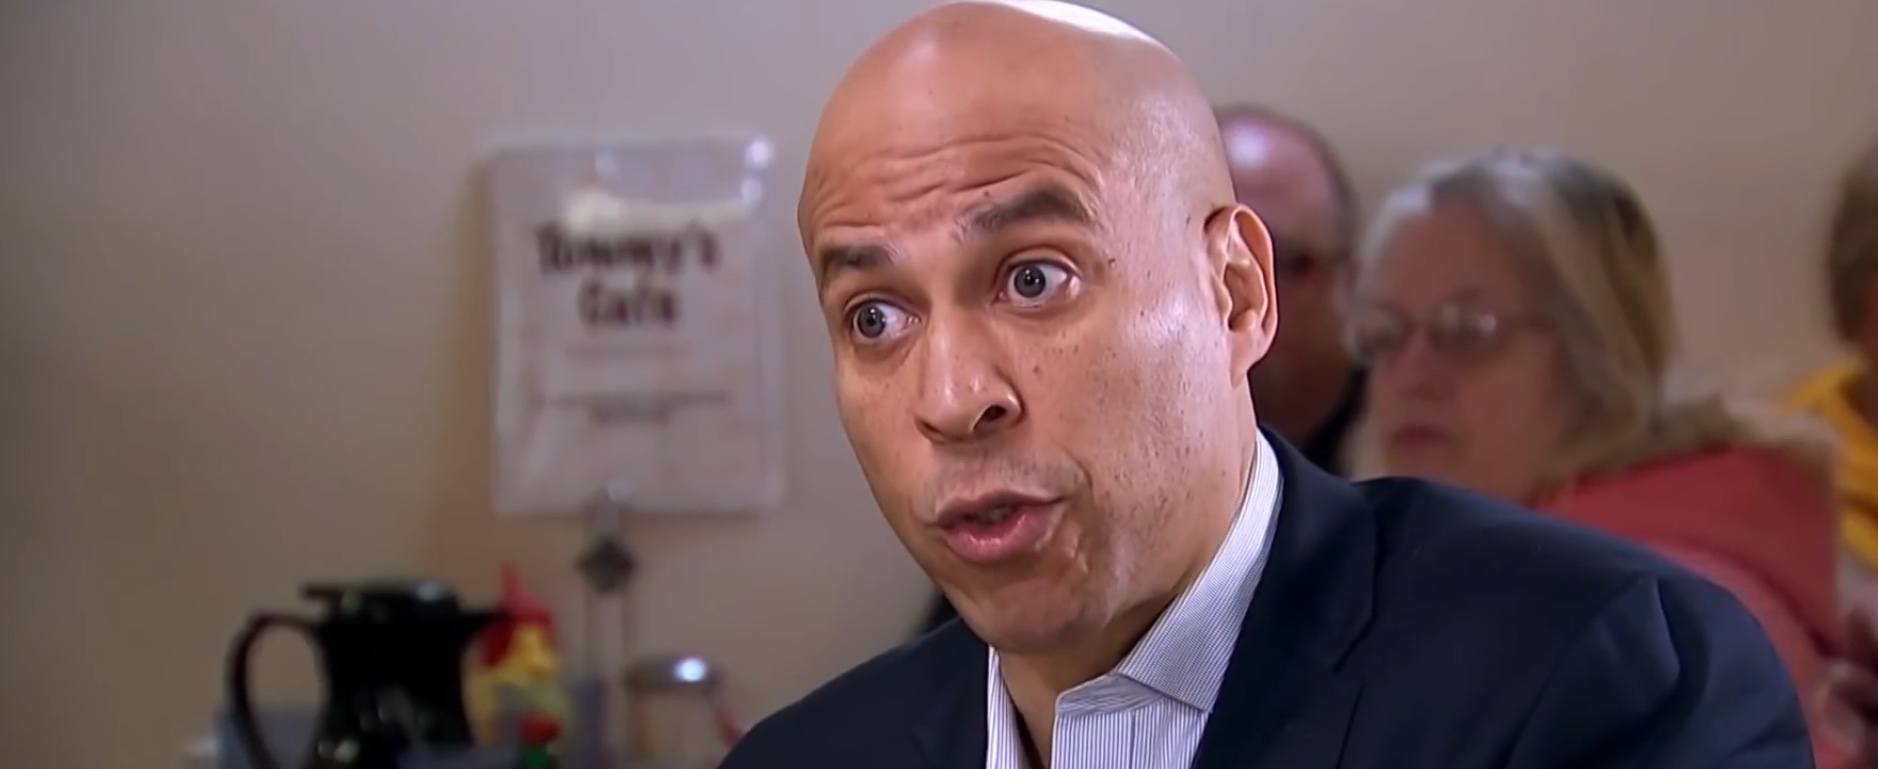 New Jersey Democratic Sen. Cory Booker appears on MSNBC’s “Hardball” to discuss his 2020 presidential candidacy, March 18, 2019. YouTube screen capture.